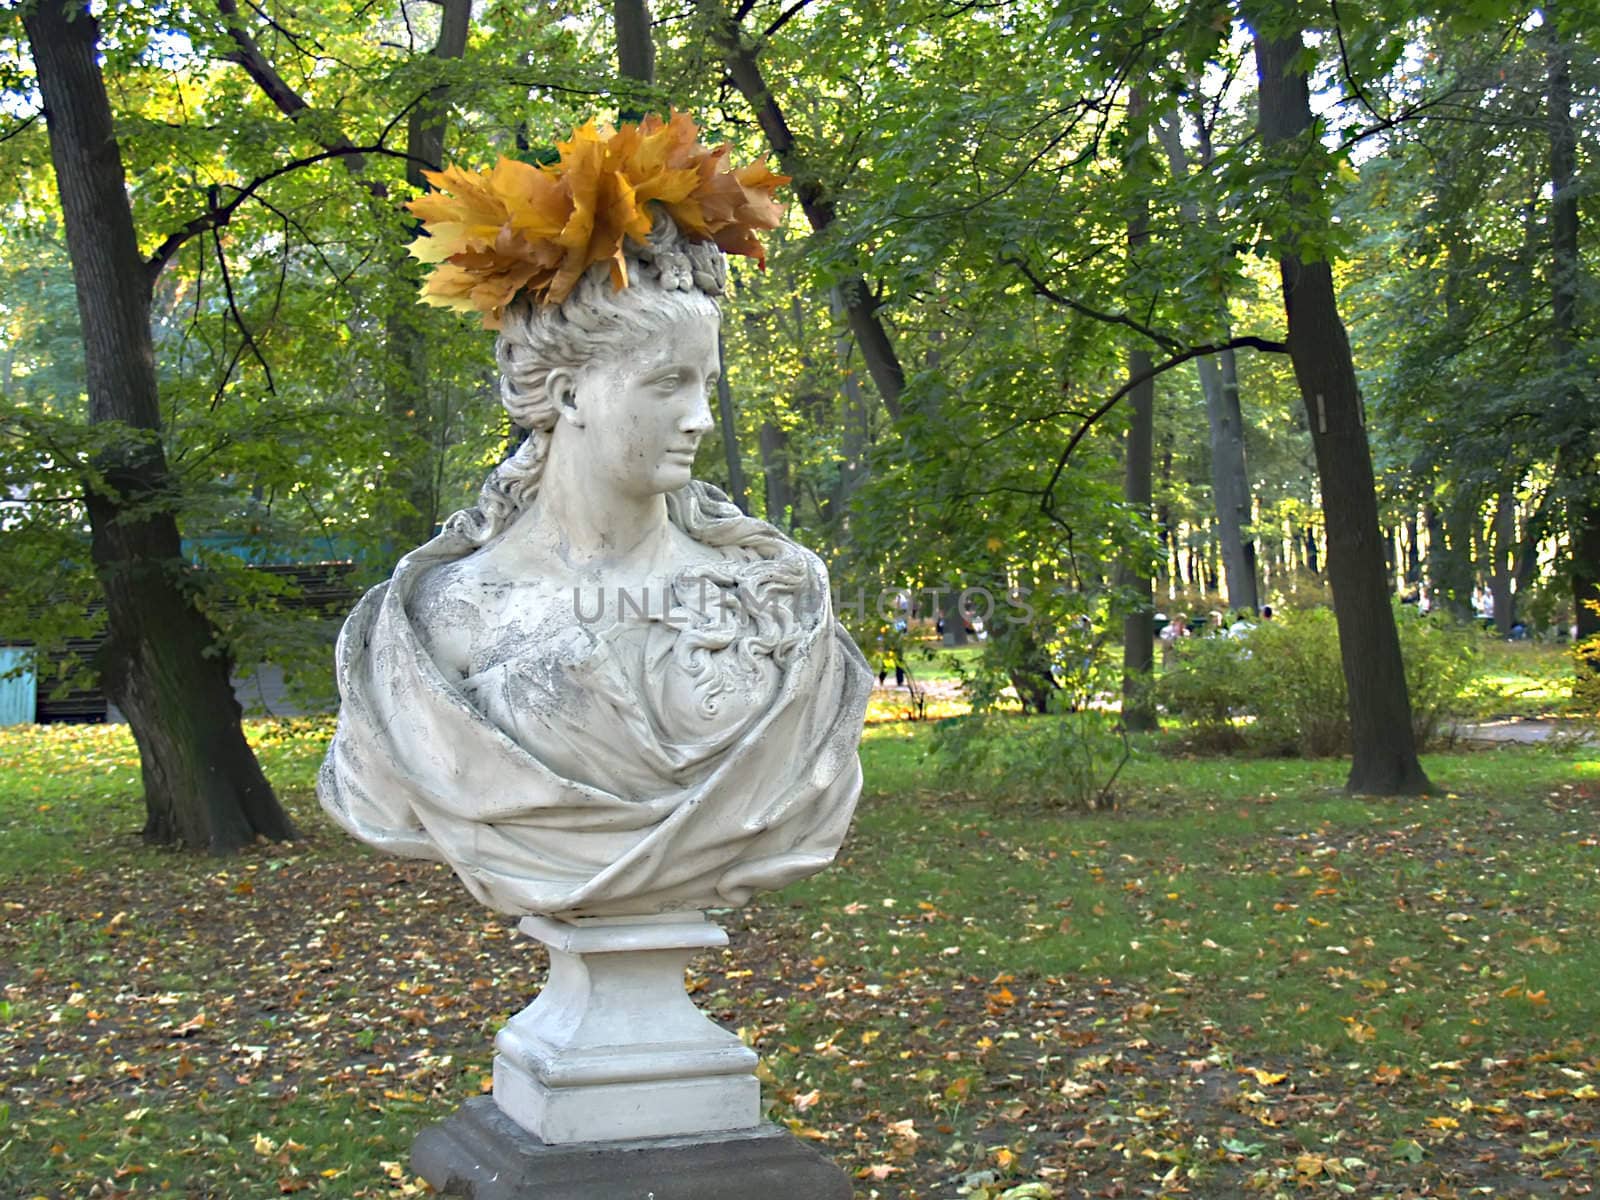 Antique sculpture with a wreath from leaves in autumn park. Summer Garden in St Petersburg Russia